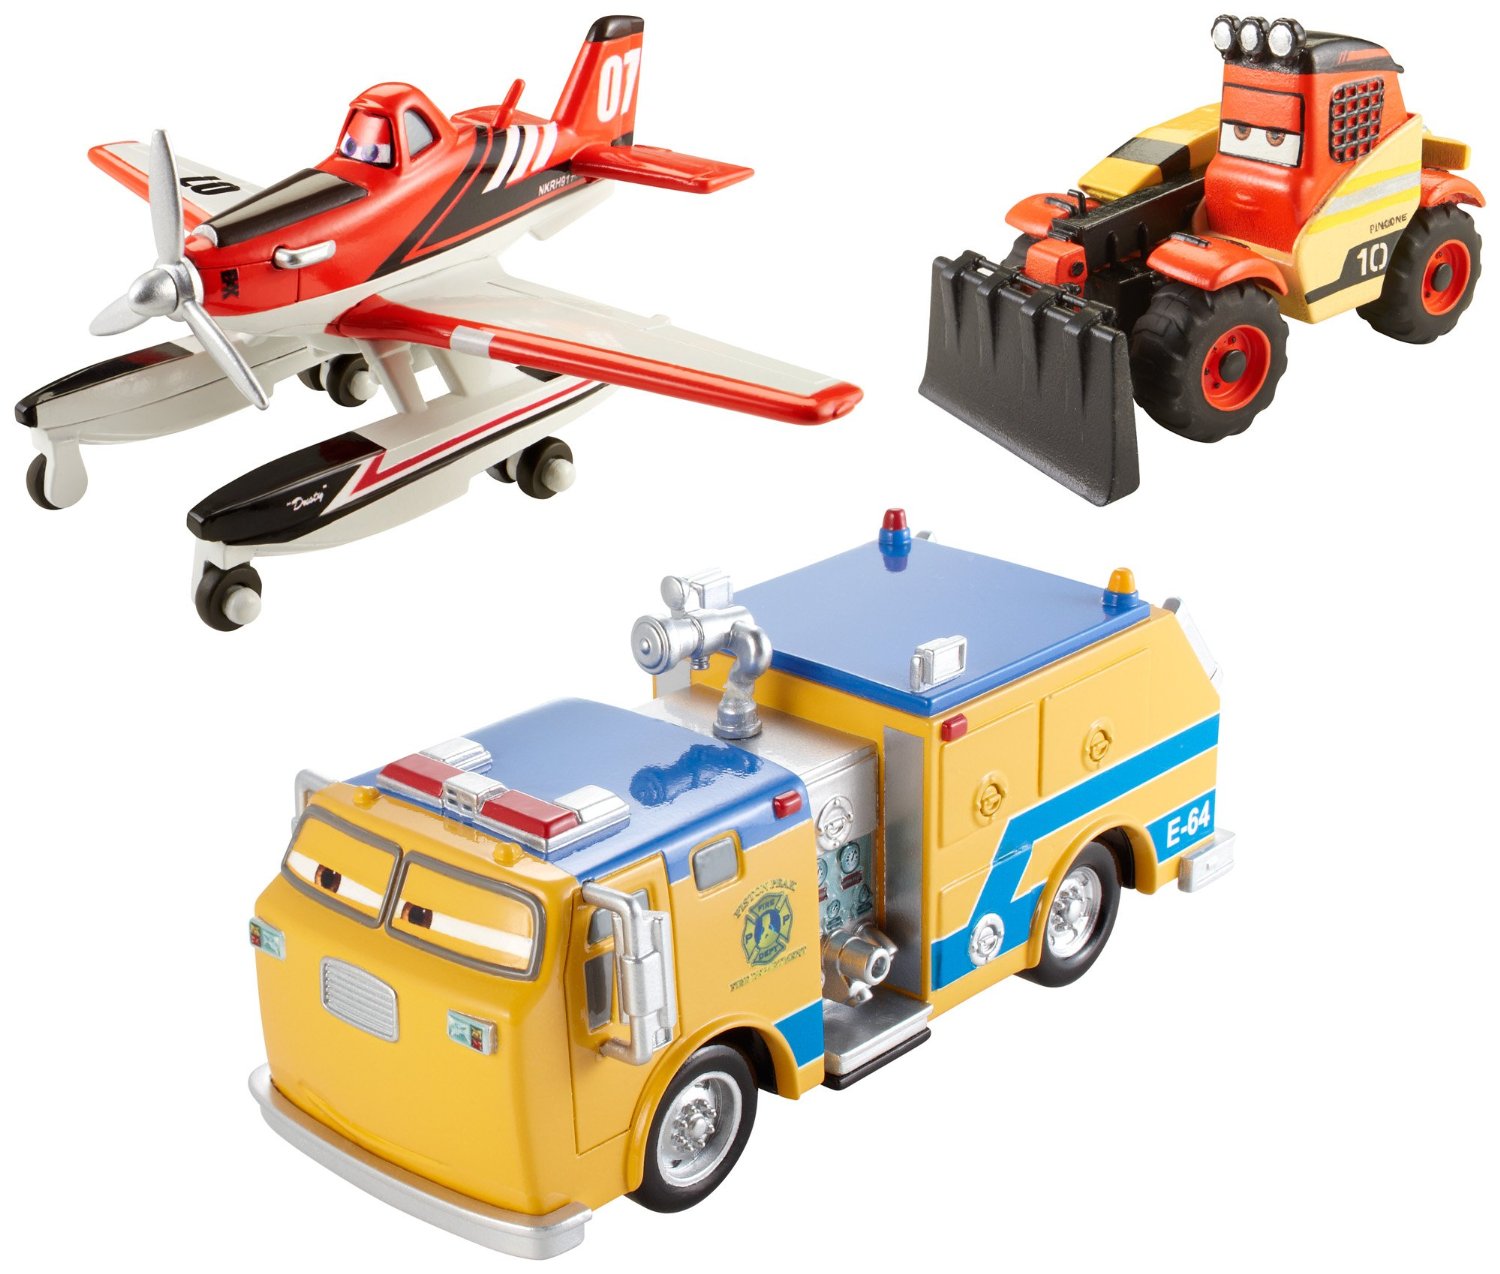 Disney Planes Fire and Rescue Die-Cast Vehicle